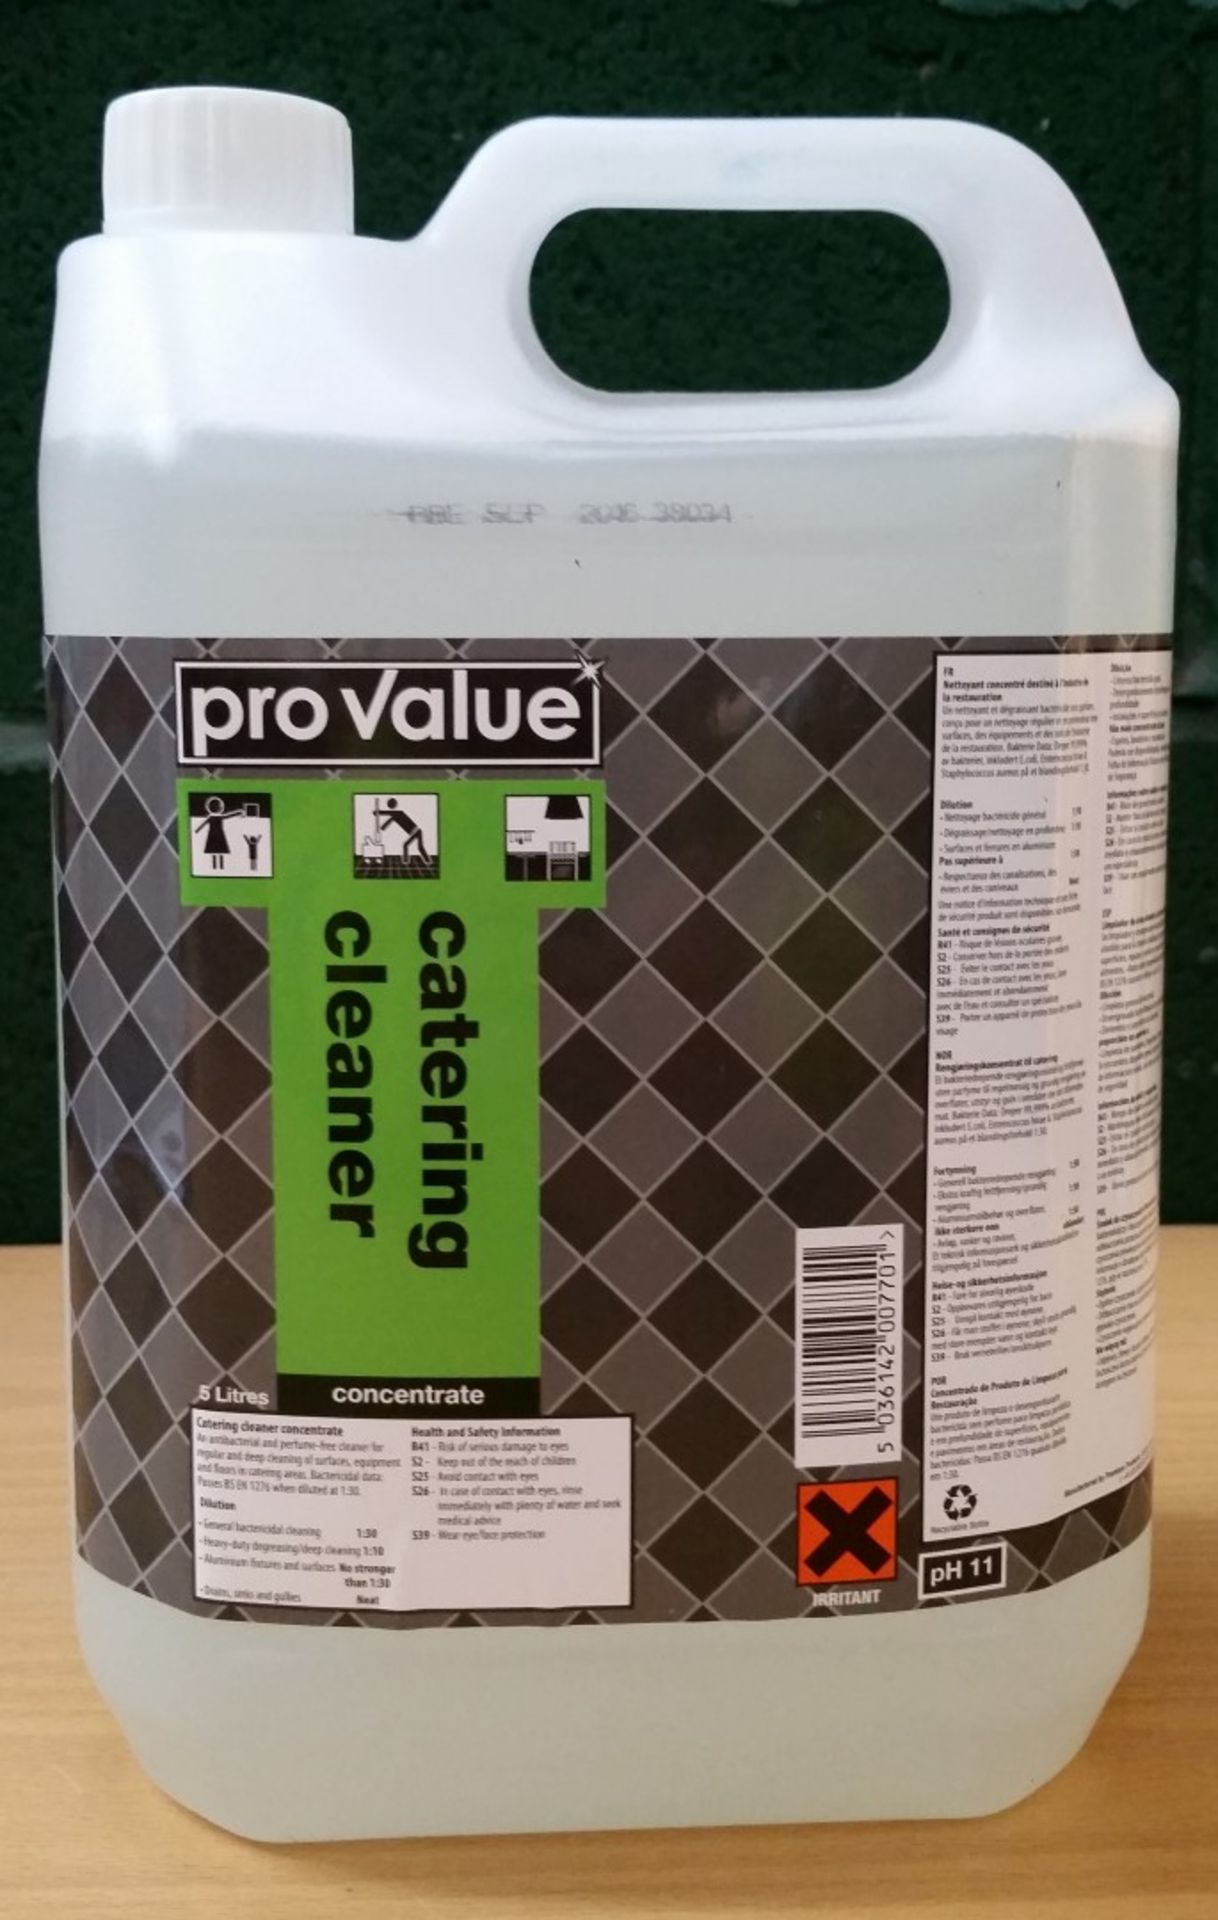 2 x Pro Value 5 Litre Catering Cleaner - Best Before September 2016 - New Boxed Stock - CL083 -